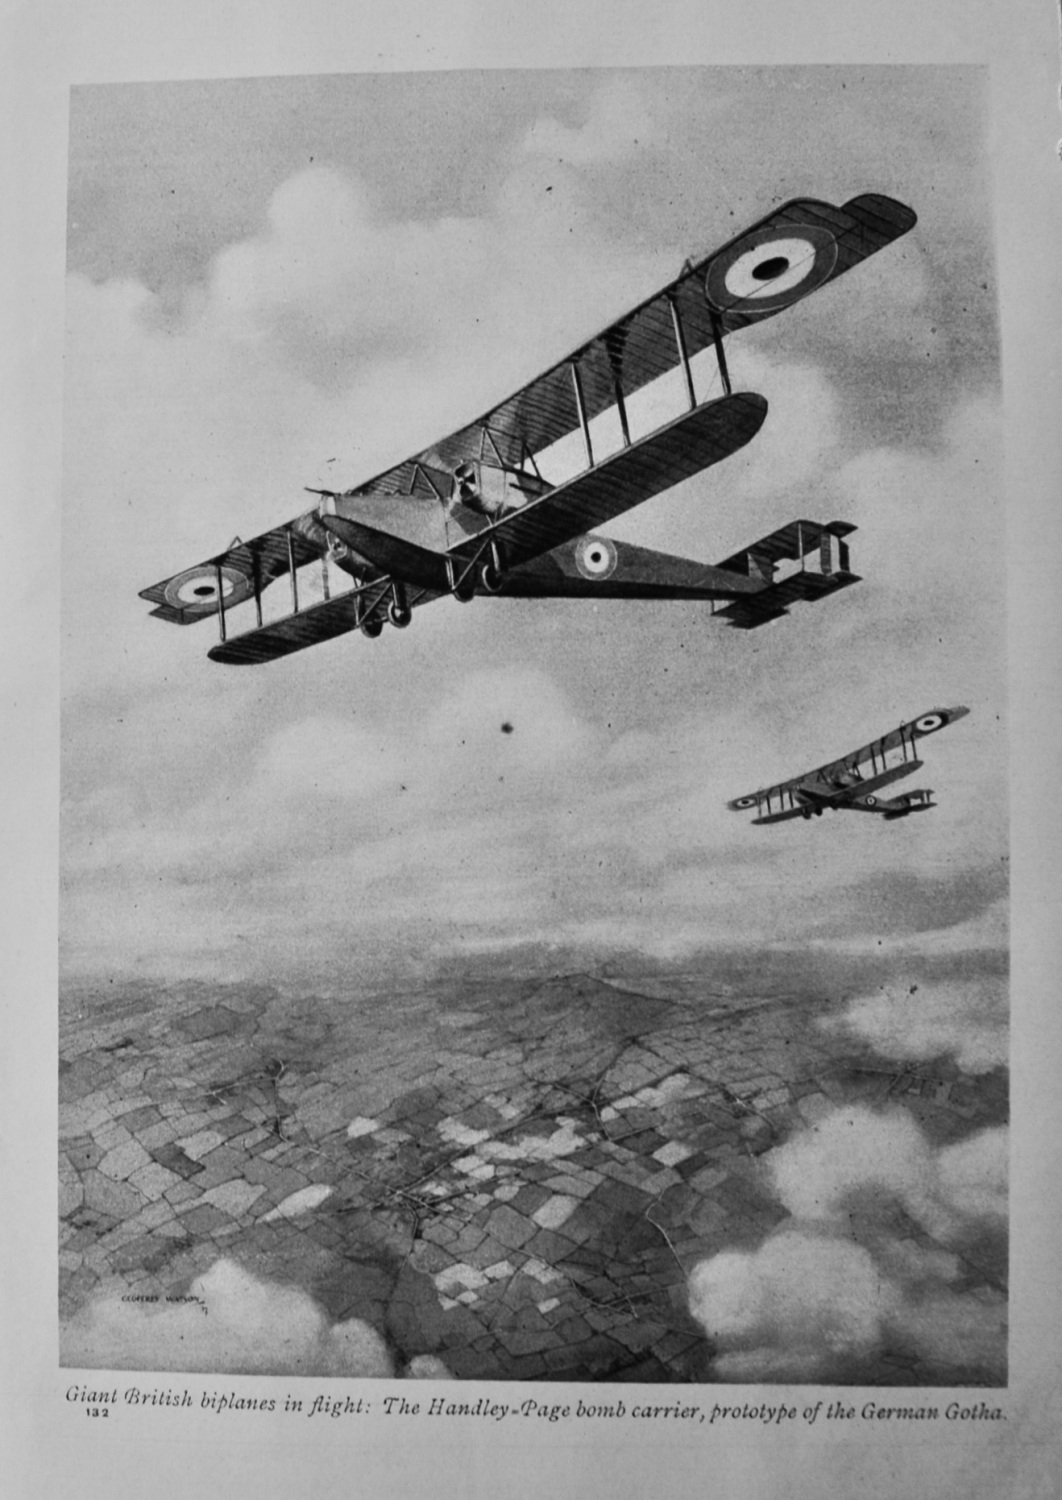 Giant British biplanes in Fight :  The Handley-Page bomb carrier, prototype